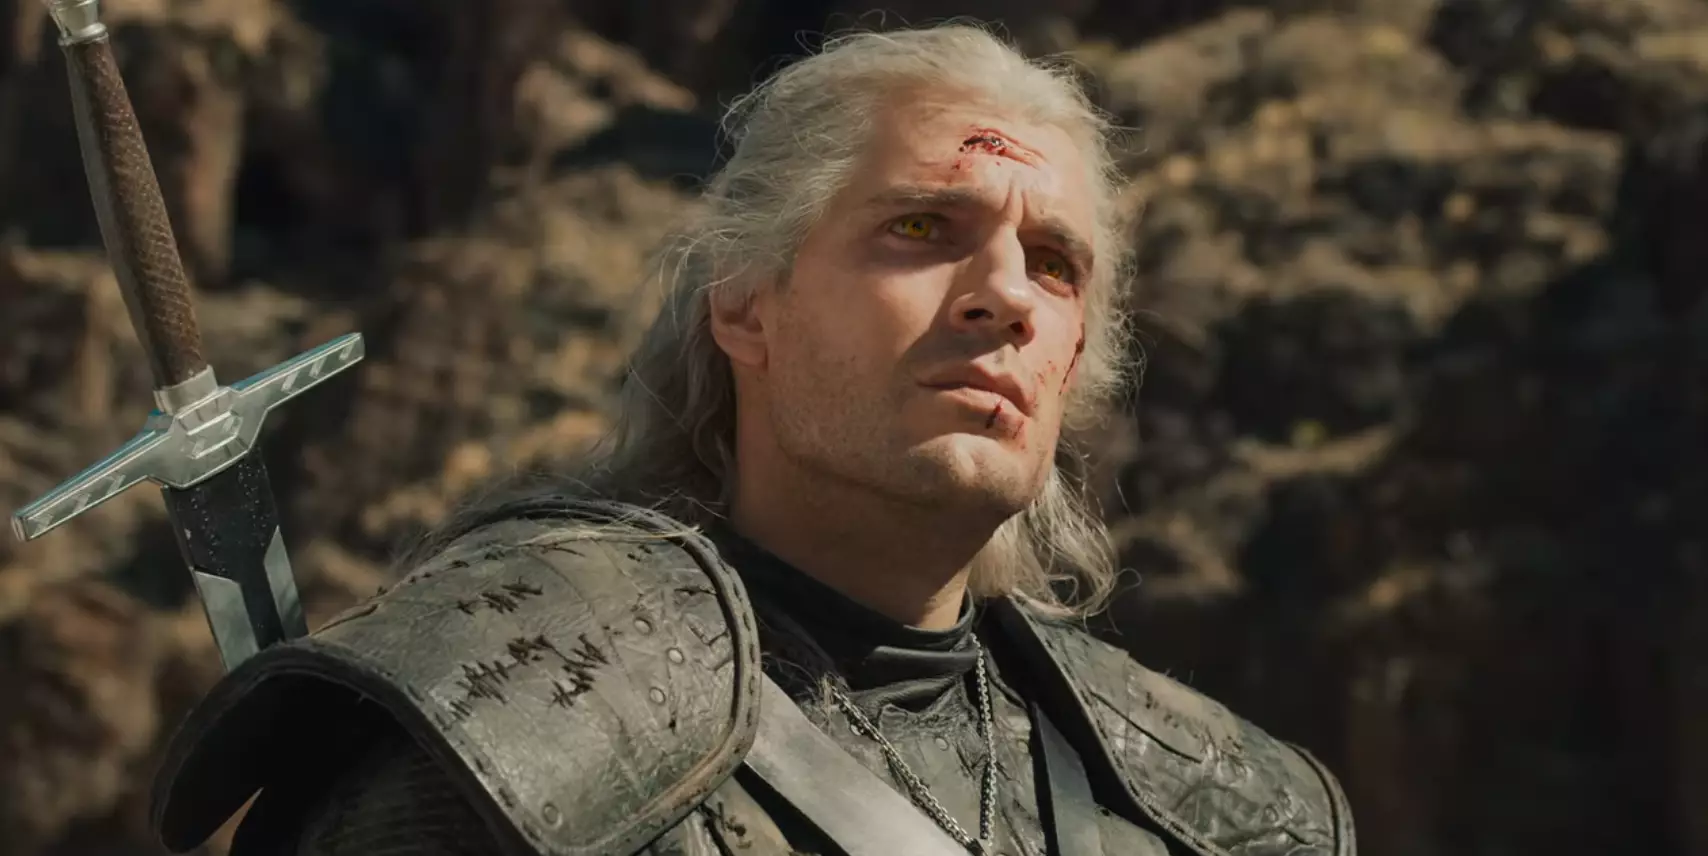 Fans of the show seem to think 'Toss a Coin to Your Witcher' is an absolute banger.